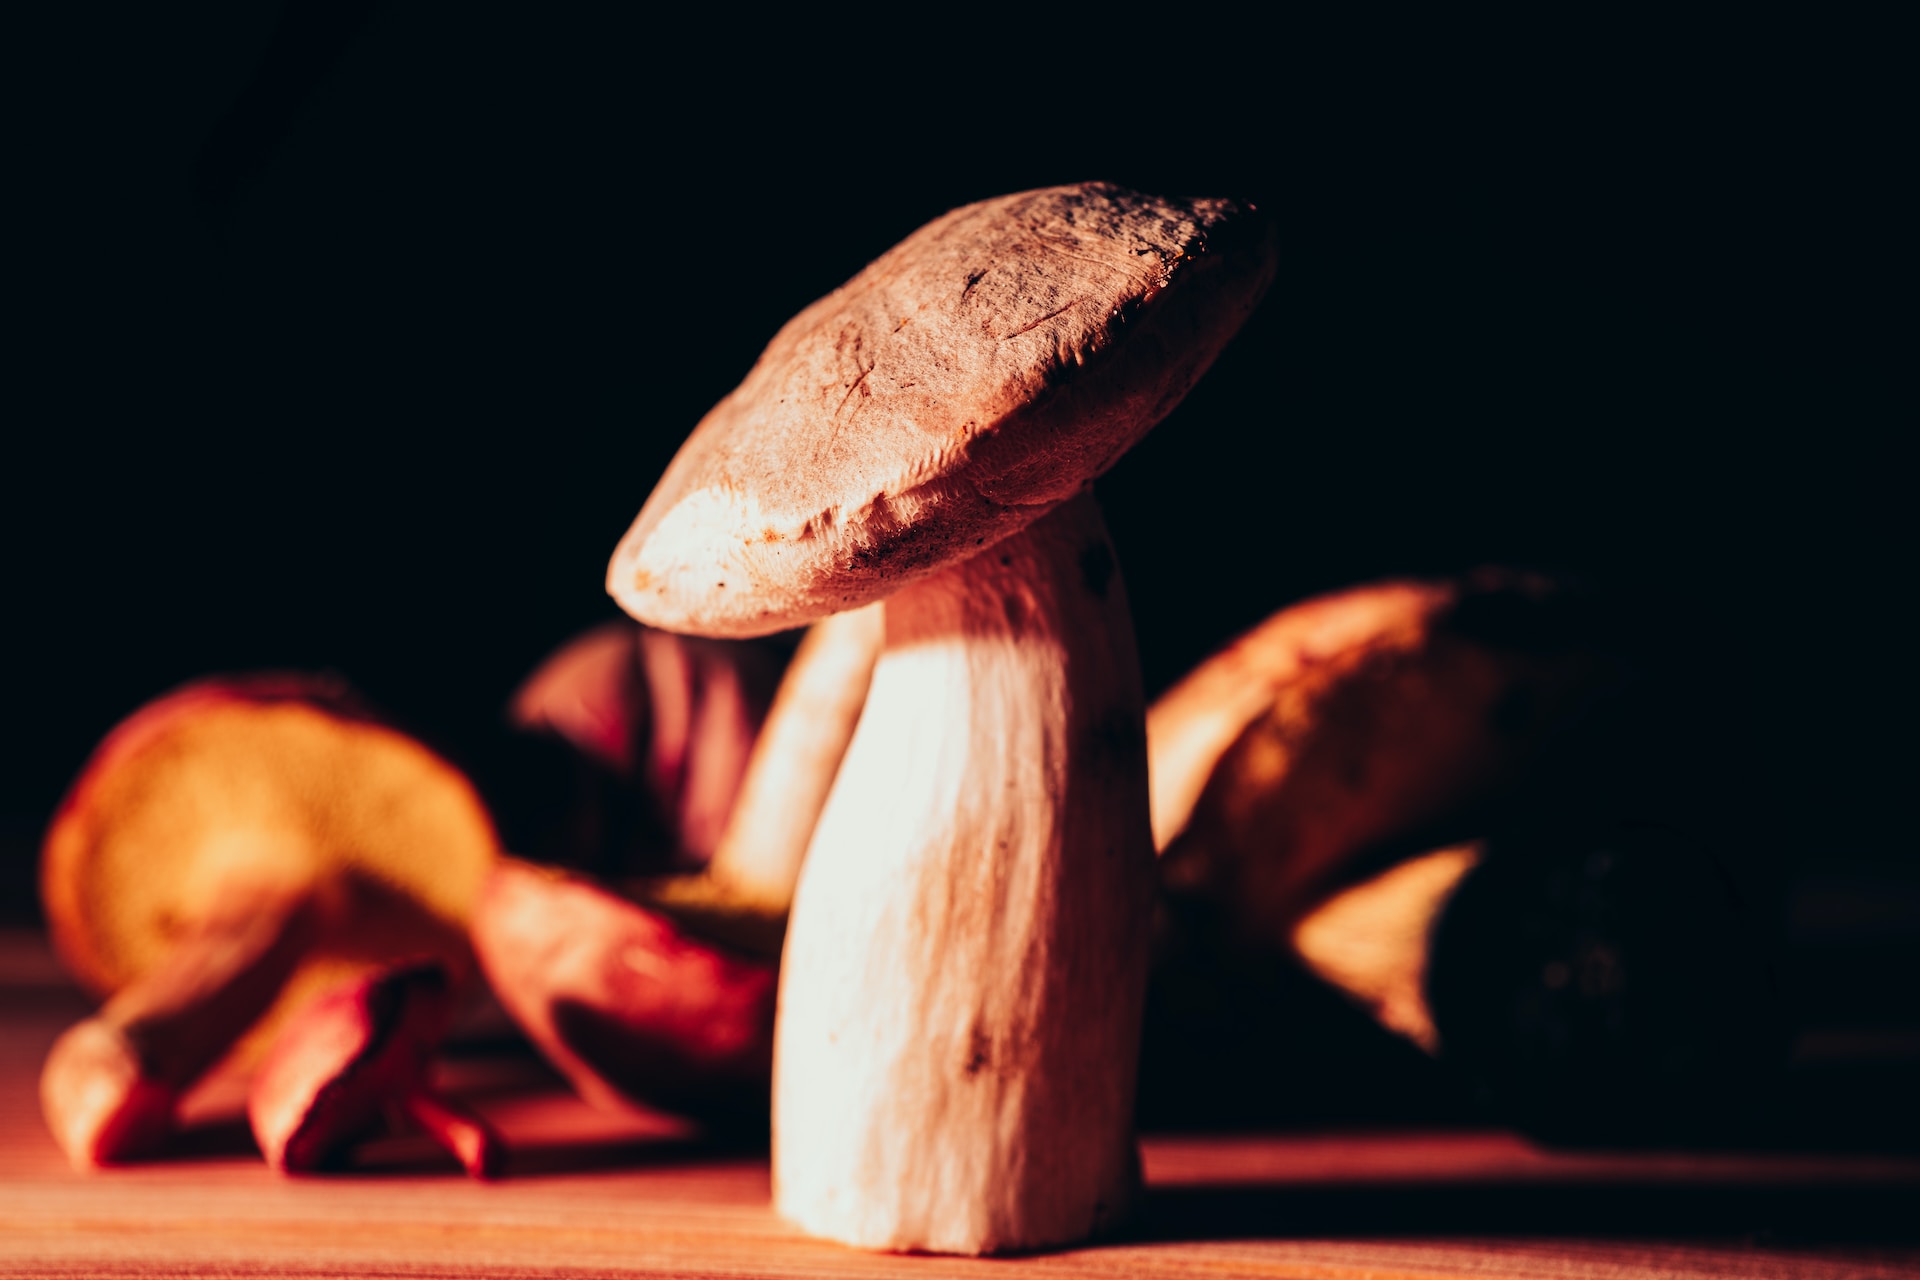 19-facts-about-porcini-mushrooms